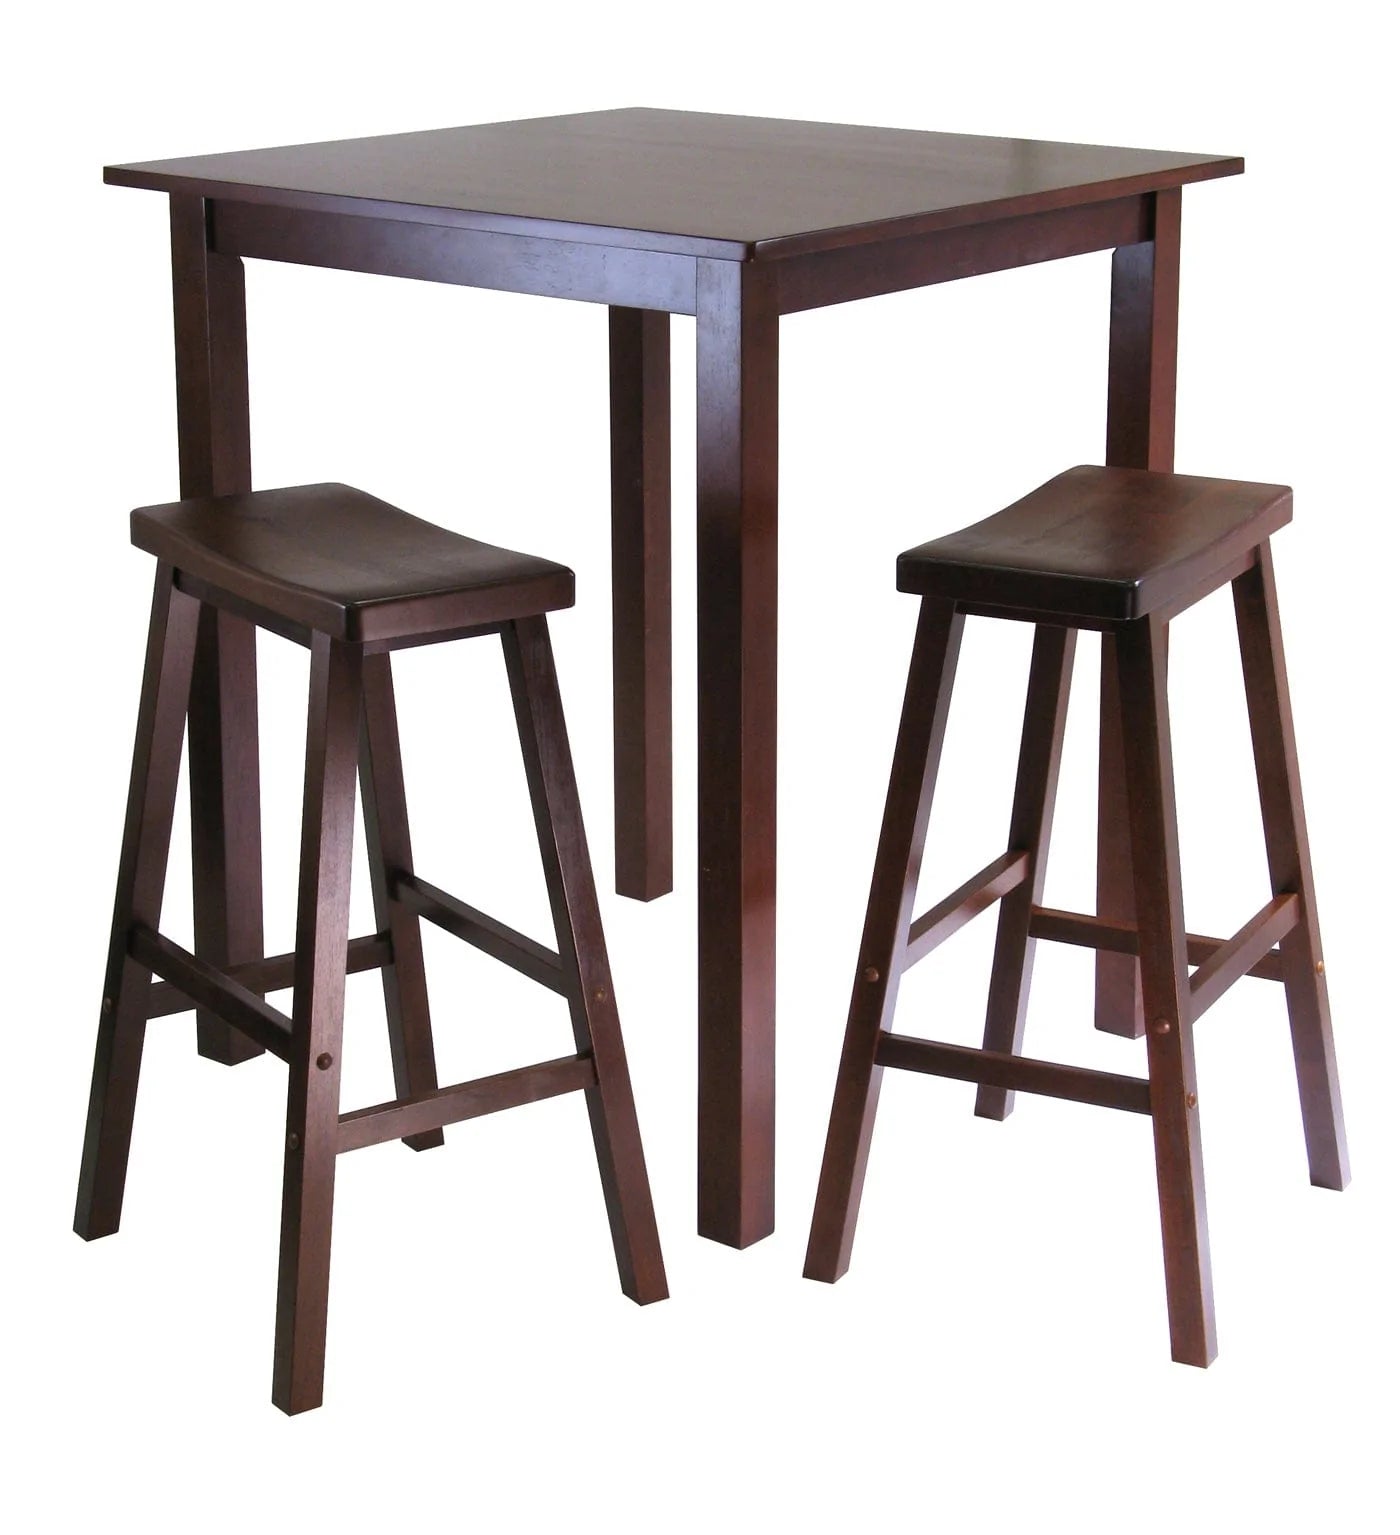 WINSOME Pub Table Set Parkland 3-Pc High Table with Saddle Seat Bar Stools, Walnut